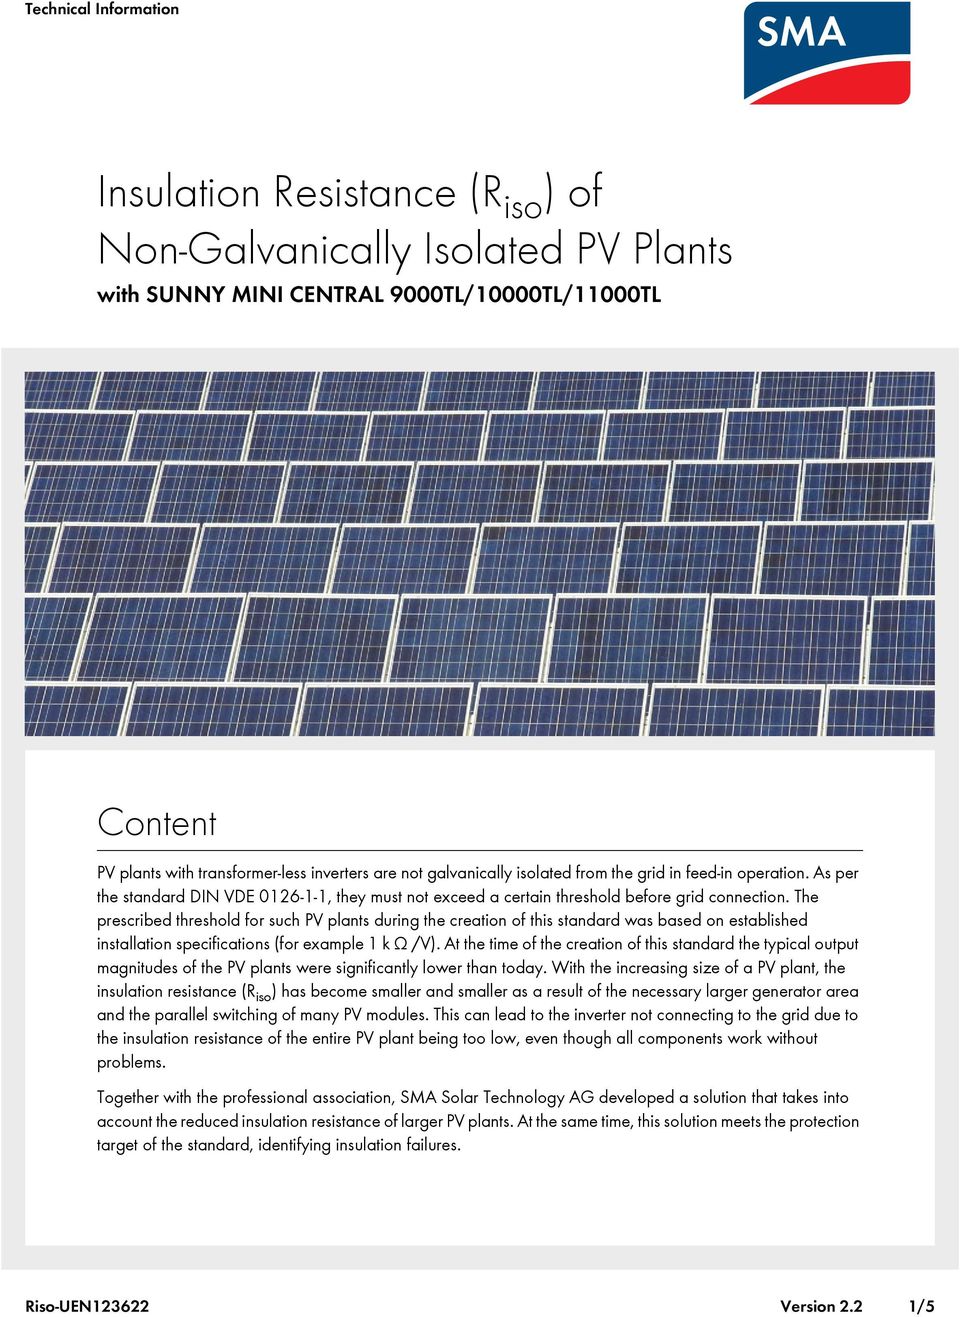 The prescribed threshold for such PV plants during the creation of this standard was based on established installation specifications (for example 1 k Ω /V).